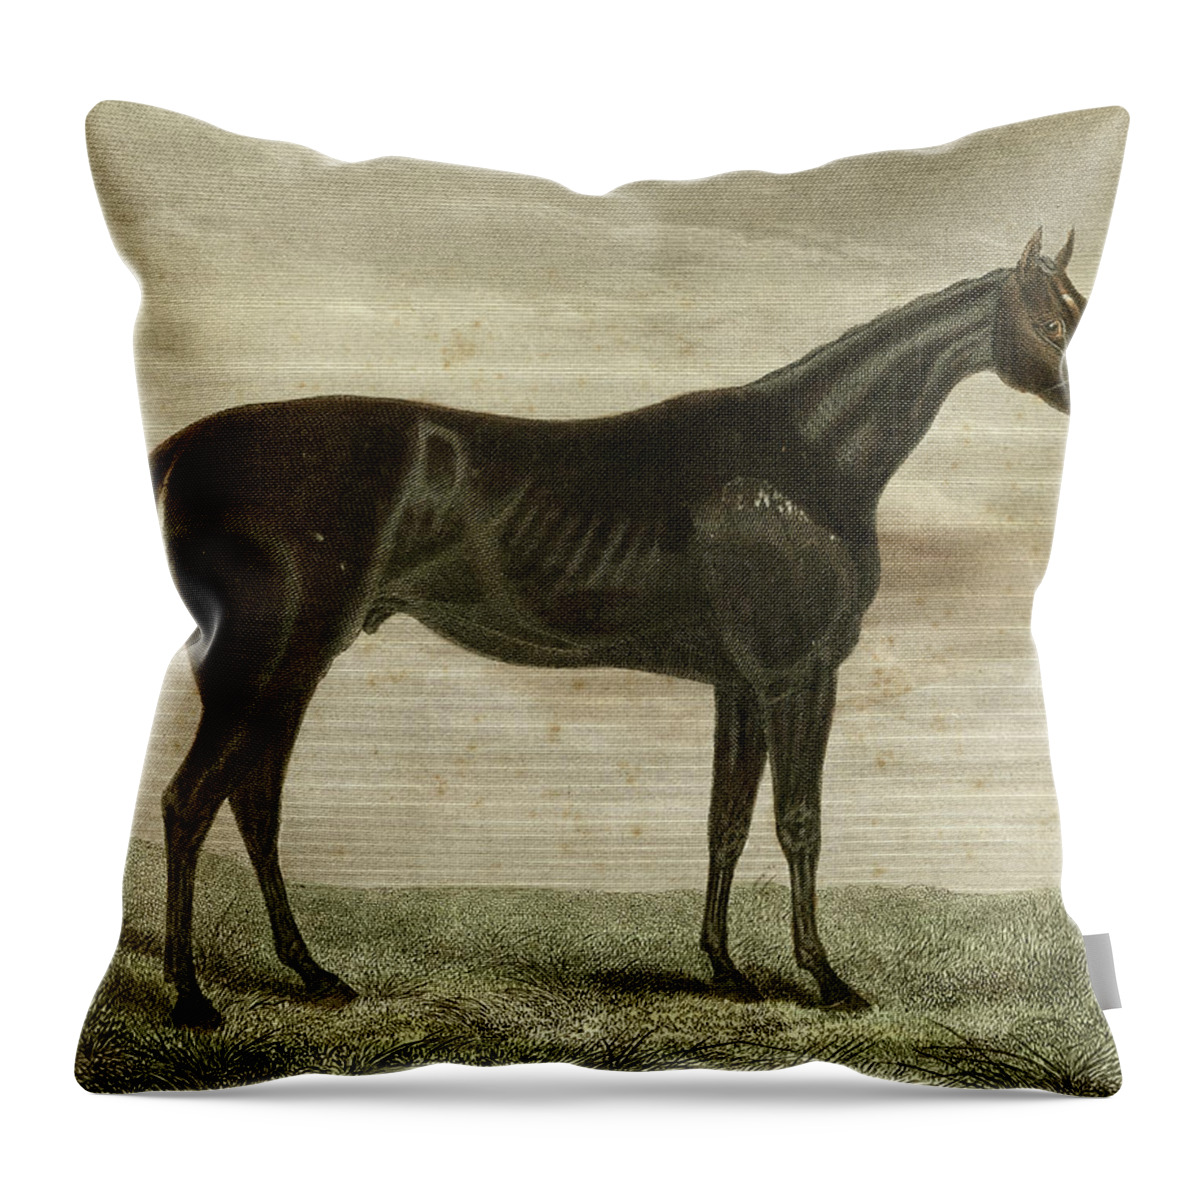 Professional Throw Pillow featuring the painting Pretender by Unknown